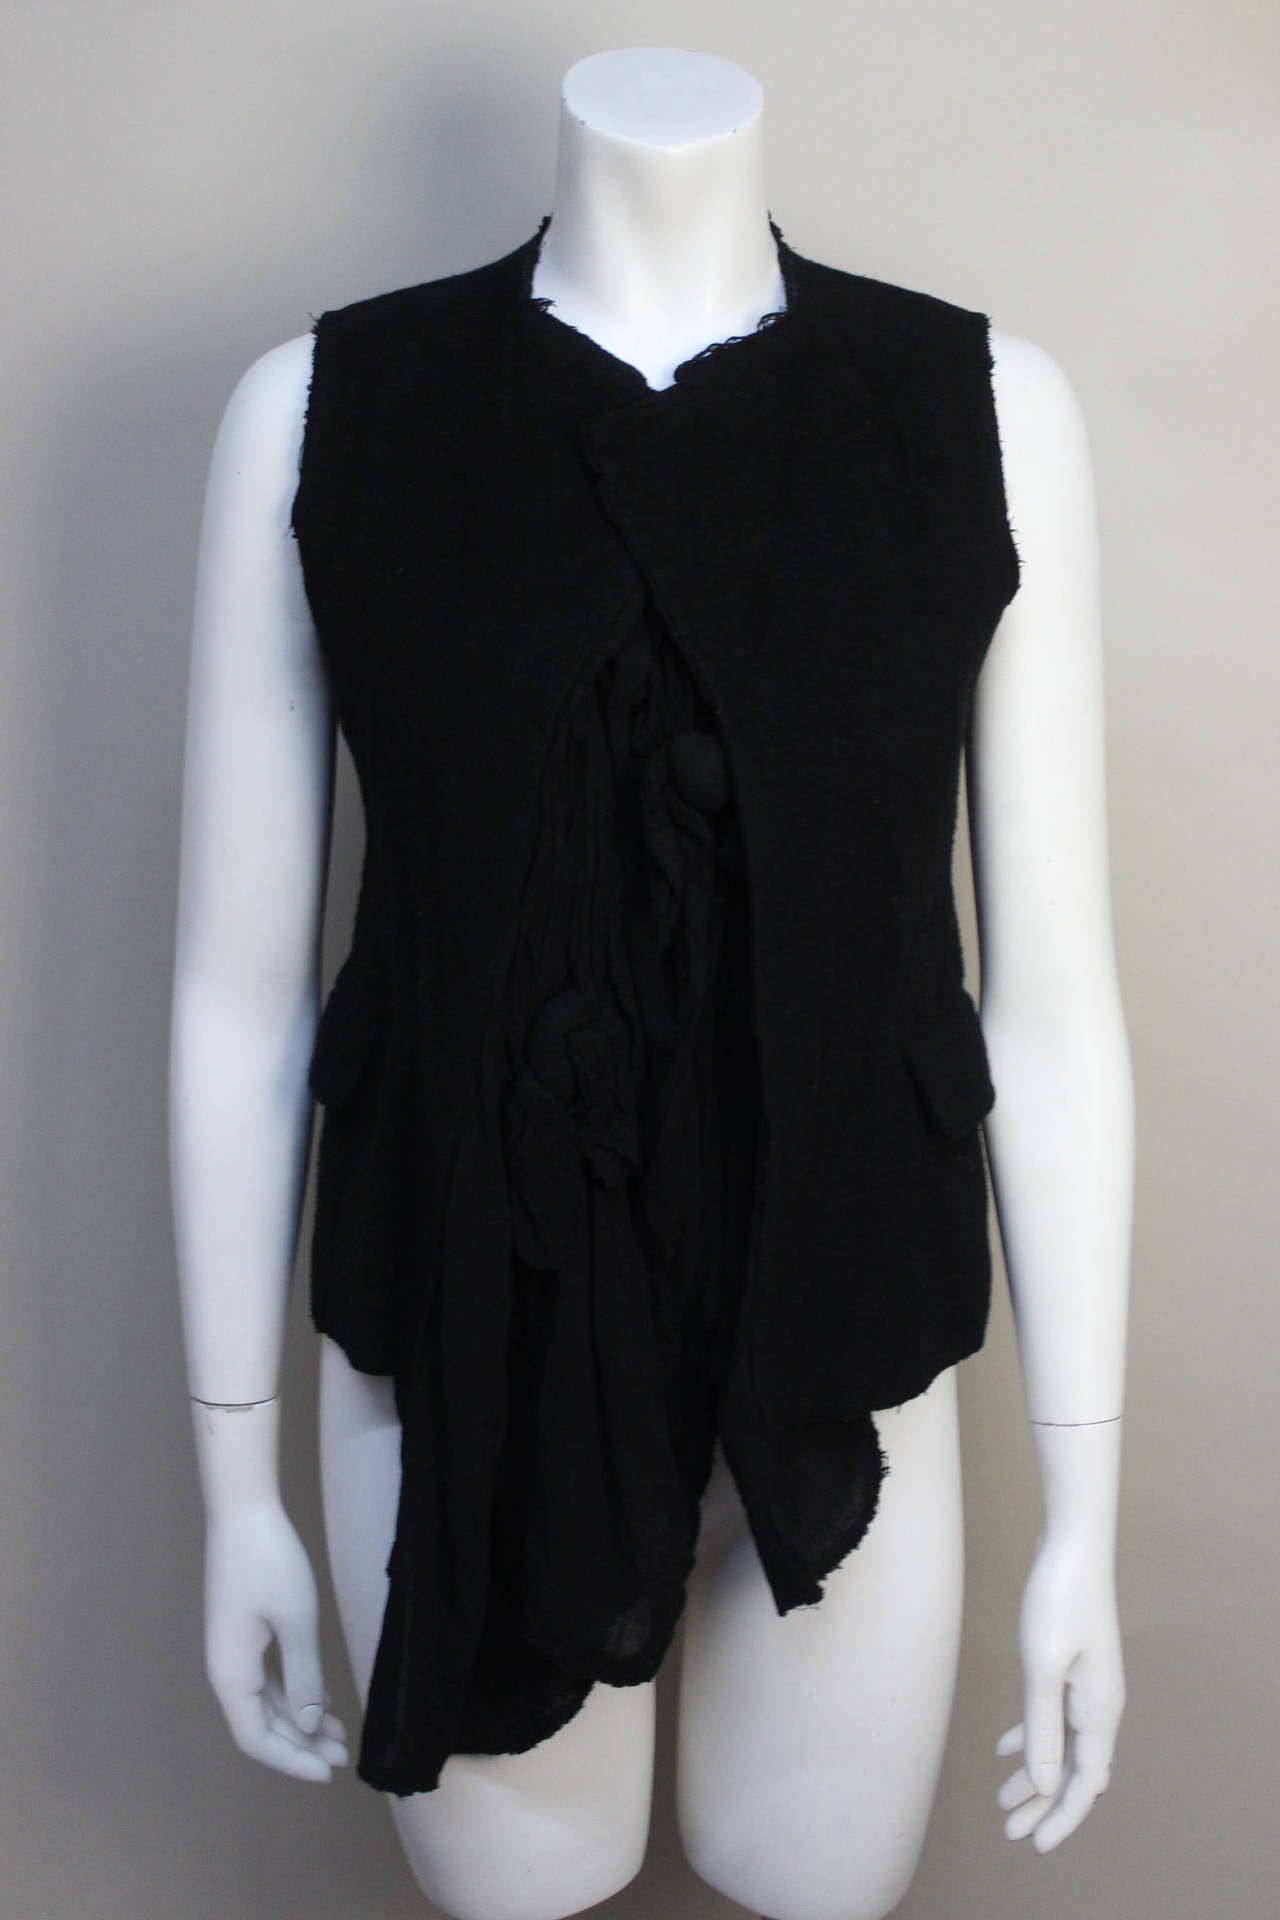 As with all Comme des Garcons designs, this top is ingenious. The outer shell is a heavy fleece unfinished vest, with pockets. It is attached to a black, soft cotton gauze layered and knotted in the front. It makes for a clever and wearable piece.